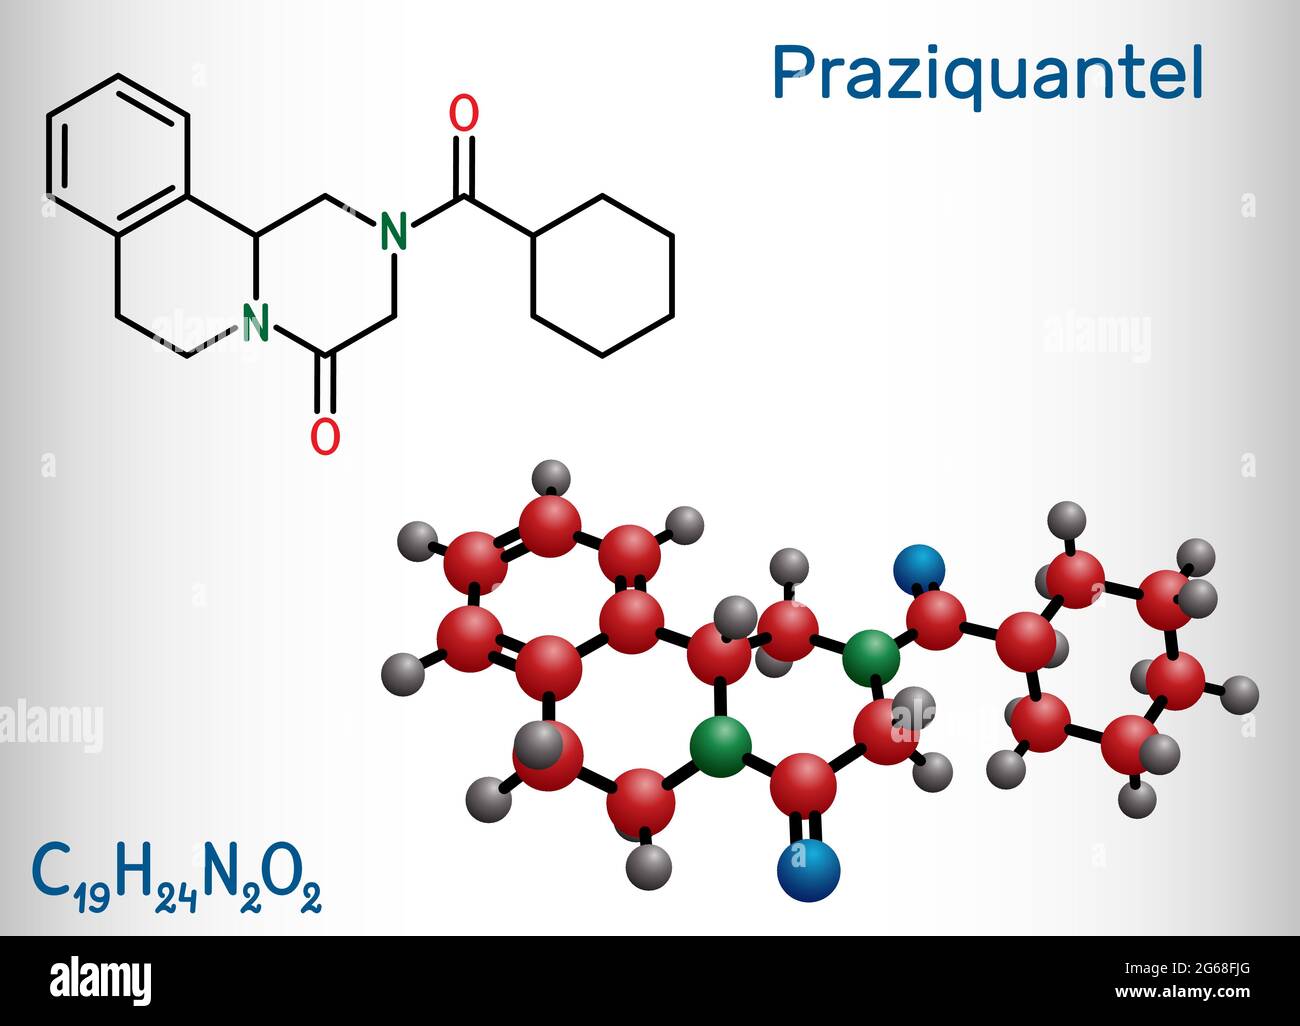 Praziquantel, PZQ, molecule. It is anthelmintic drug for treatment cysticercosis, schistosome, cestode and trematode infestations. Structural chemical Stock Vector